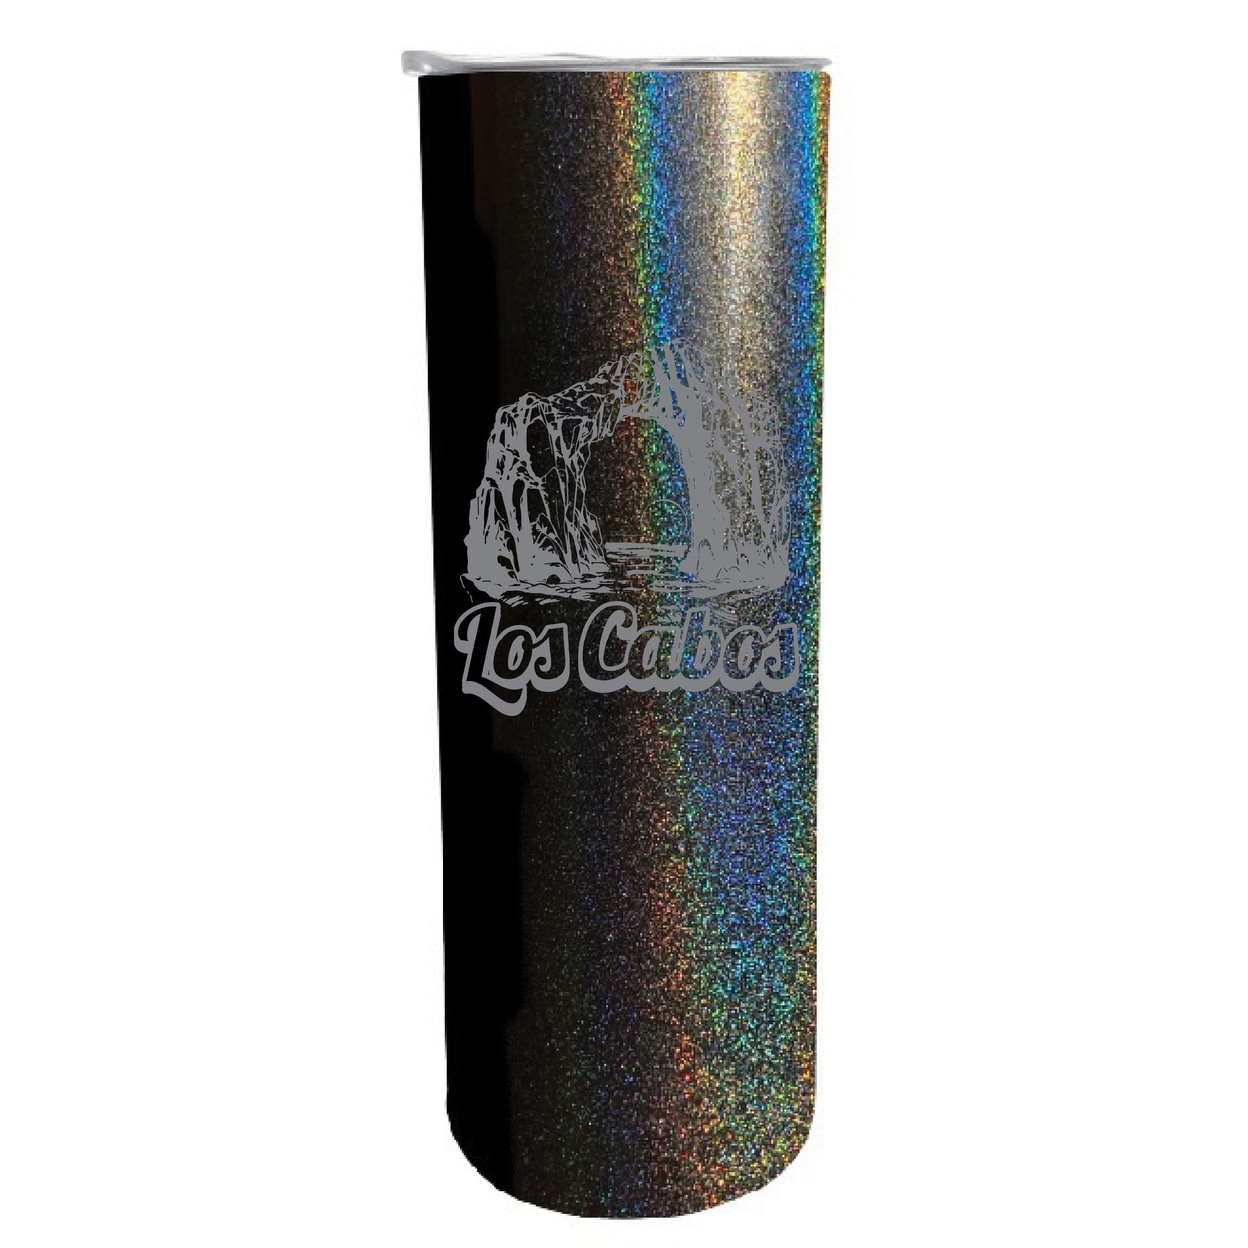 Los Cabos Mexico Souvenir 20 Oz Engraved Insulated Stainless Steel Skinny Tumbler - Black Glitter,,4-Pack